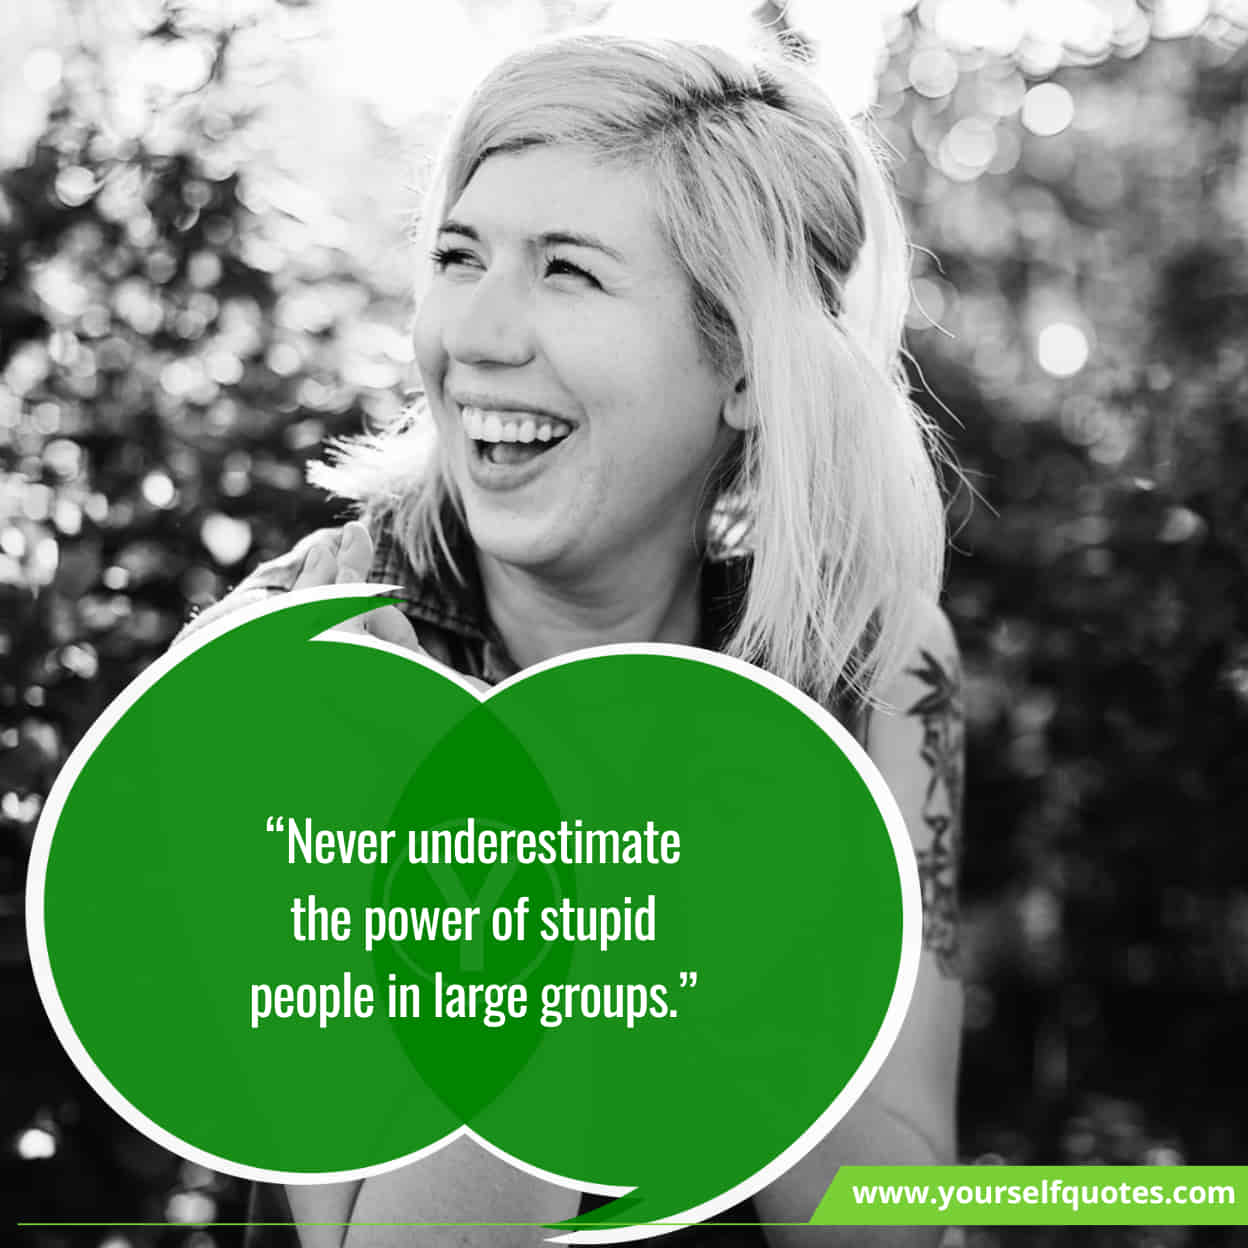 Best Quotes On Stupid